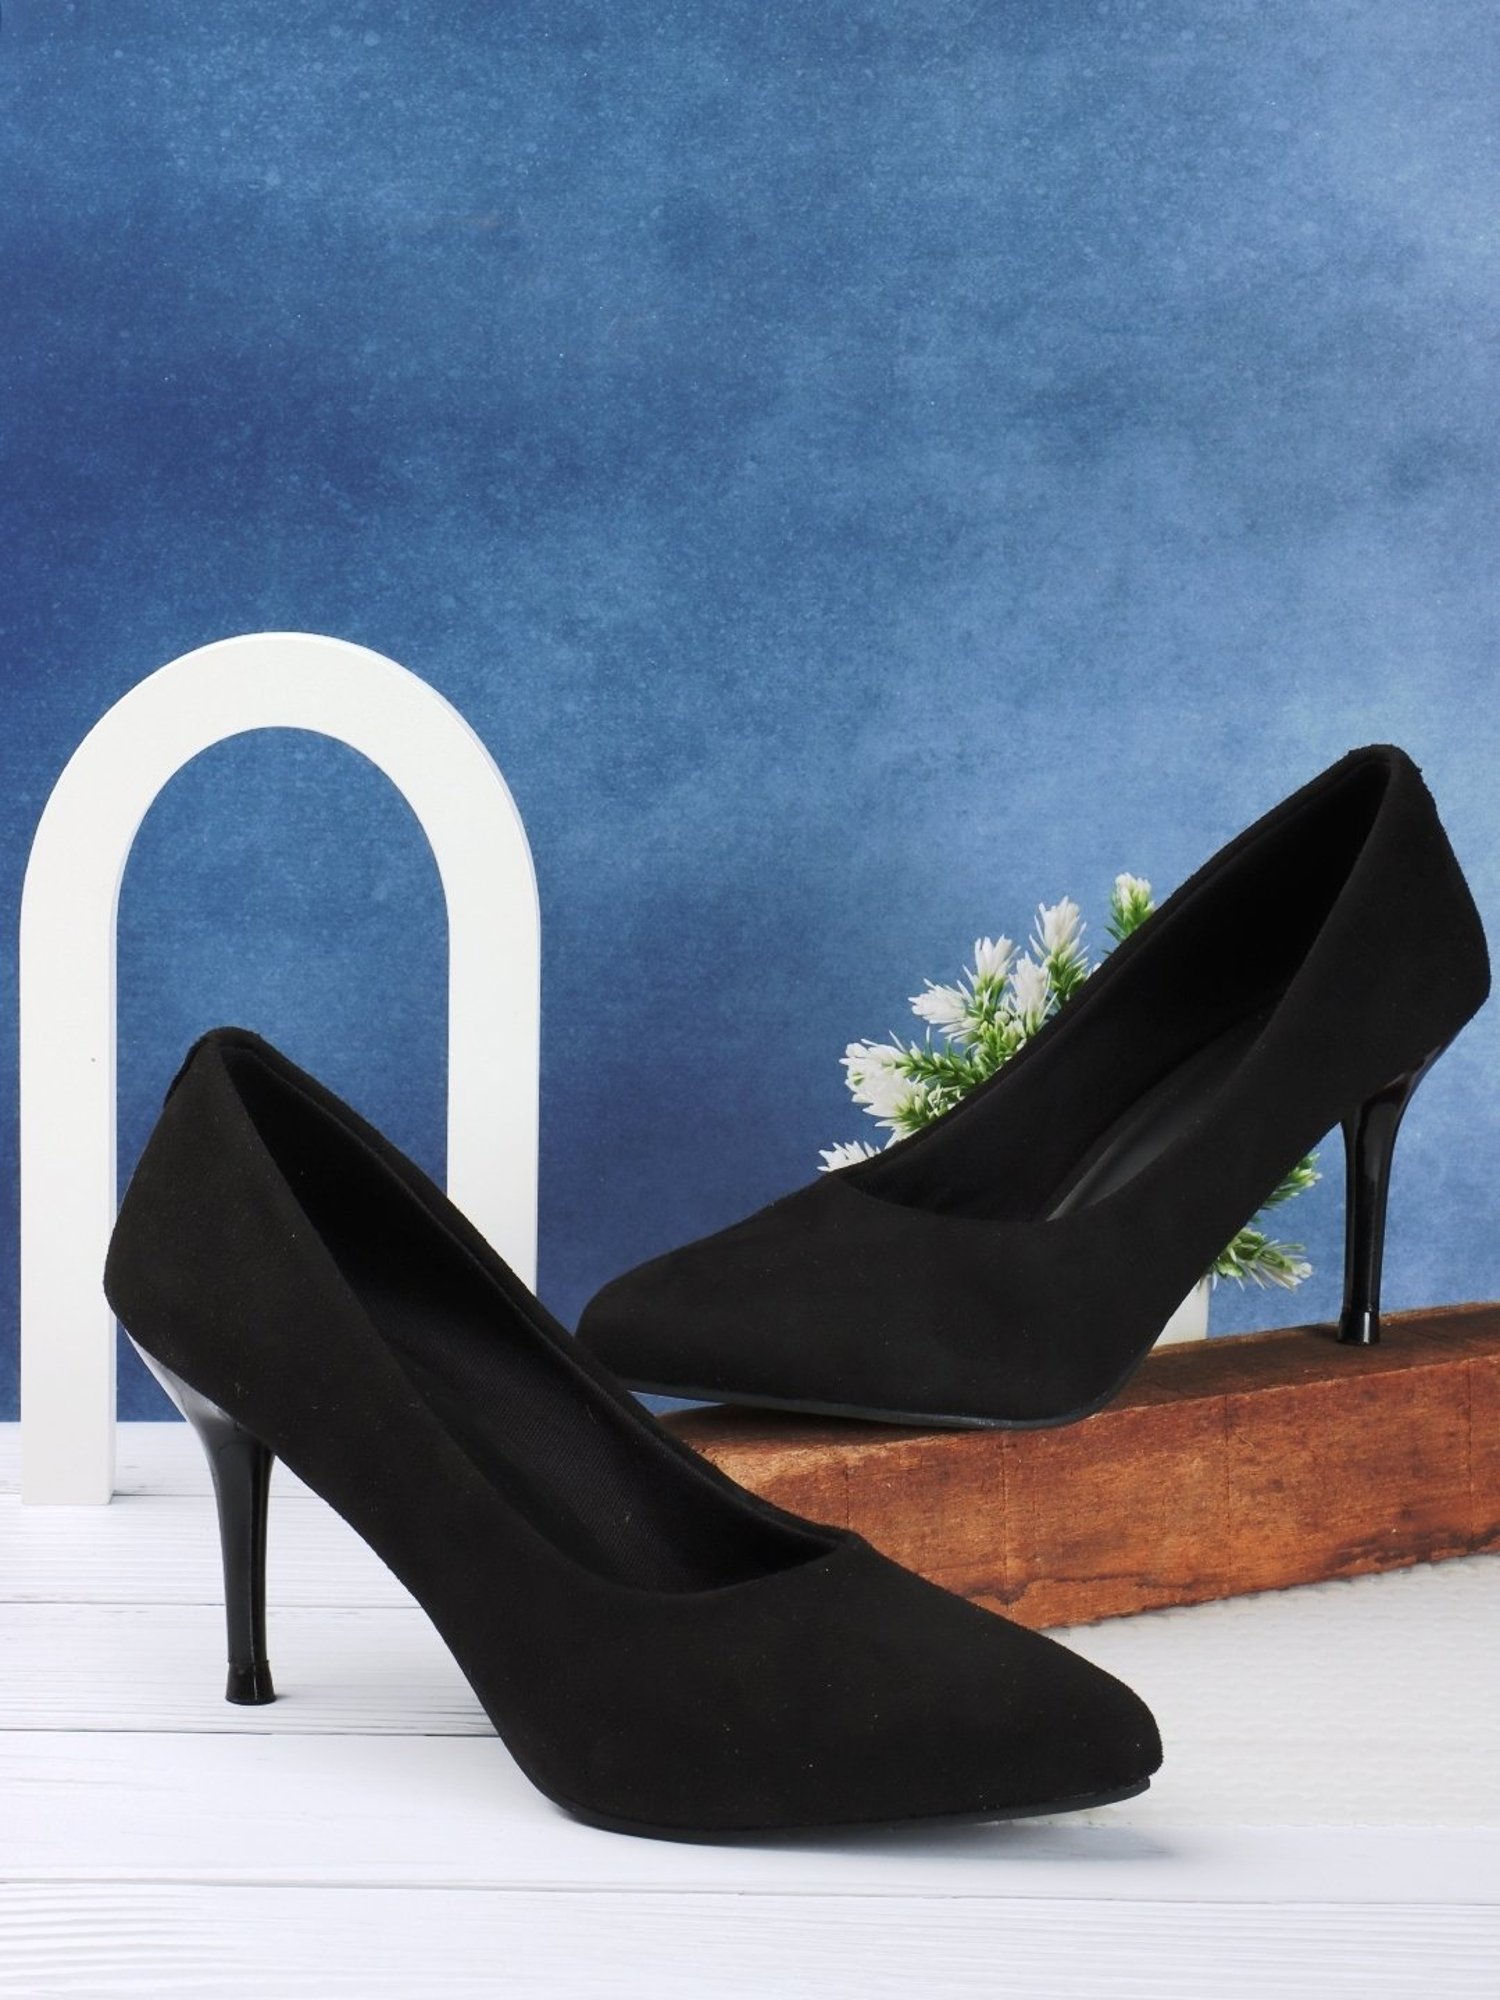 Black Pencil Heel Shoes GloGlamp Lowest Prices